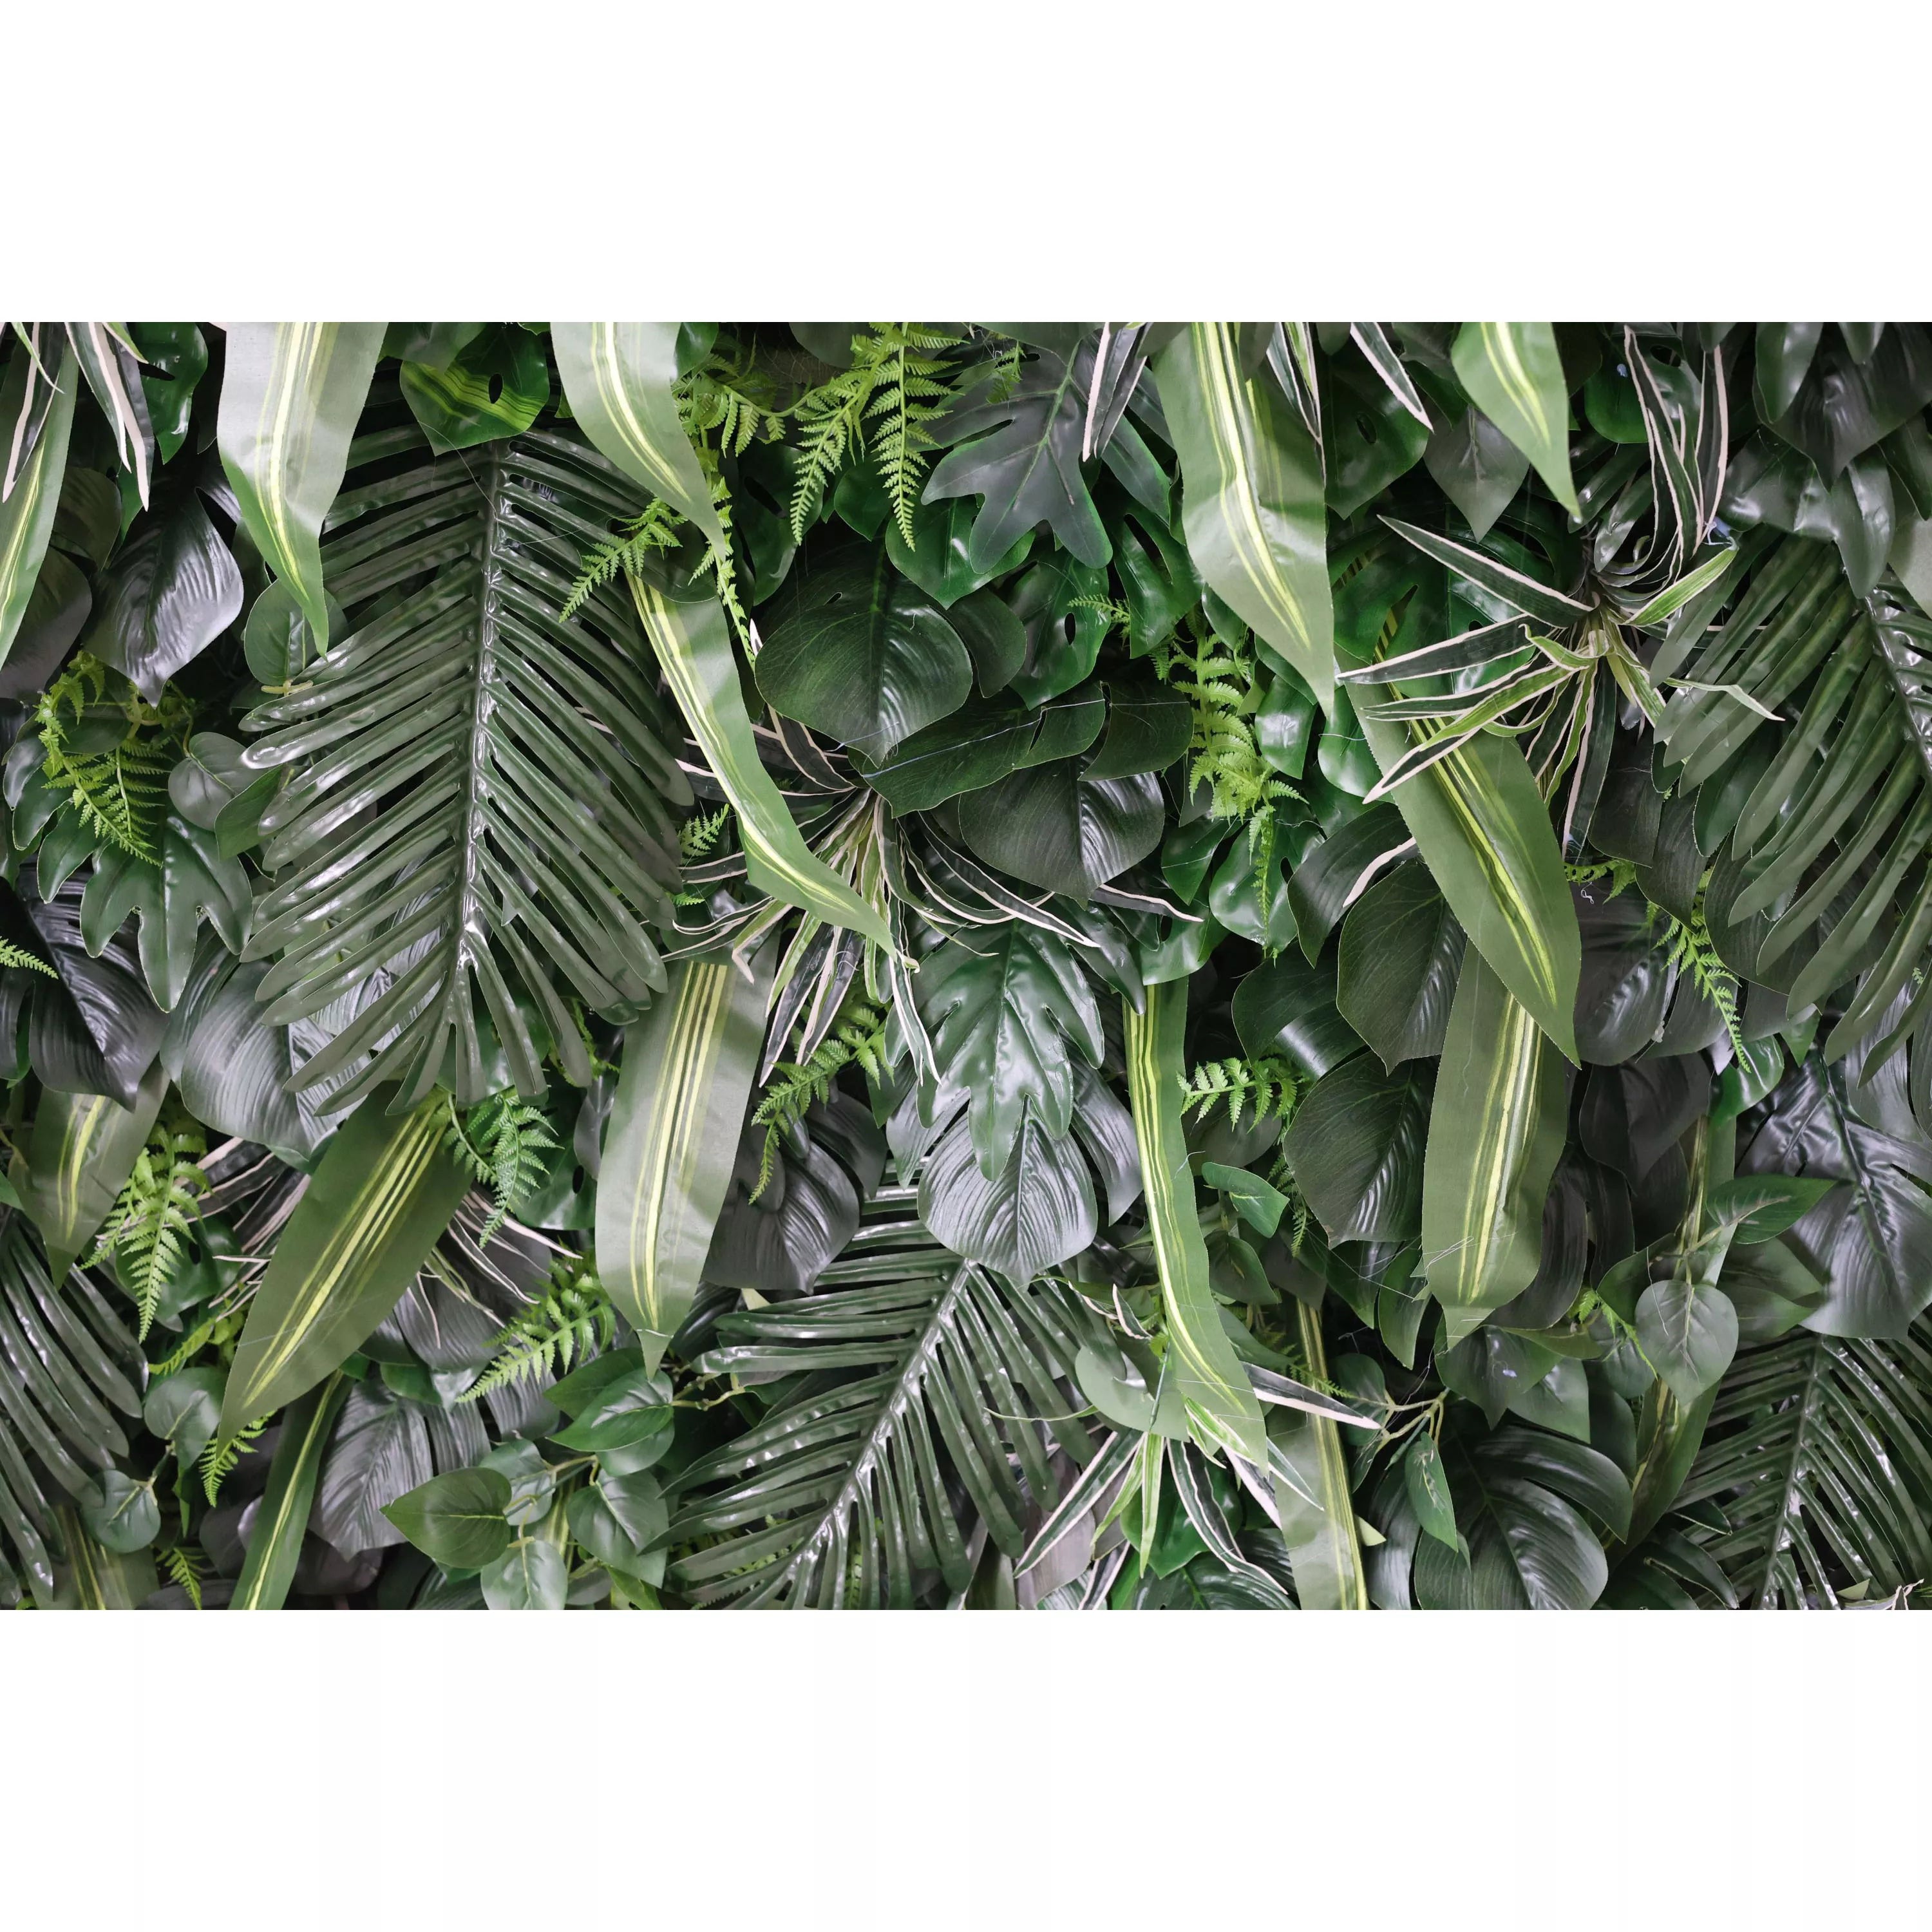 Valar Flower Roll Up Artificial Plant Wall Backdrop: Verdant Rainforest - Immersive Greenery for Any Event-VF-240